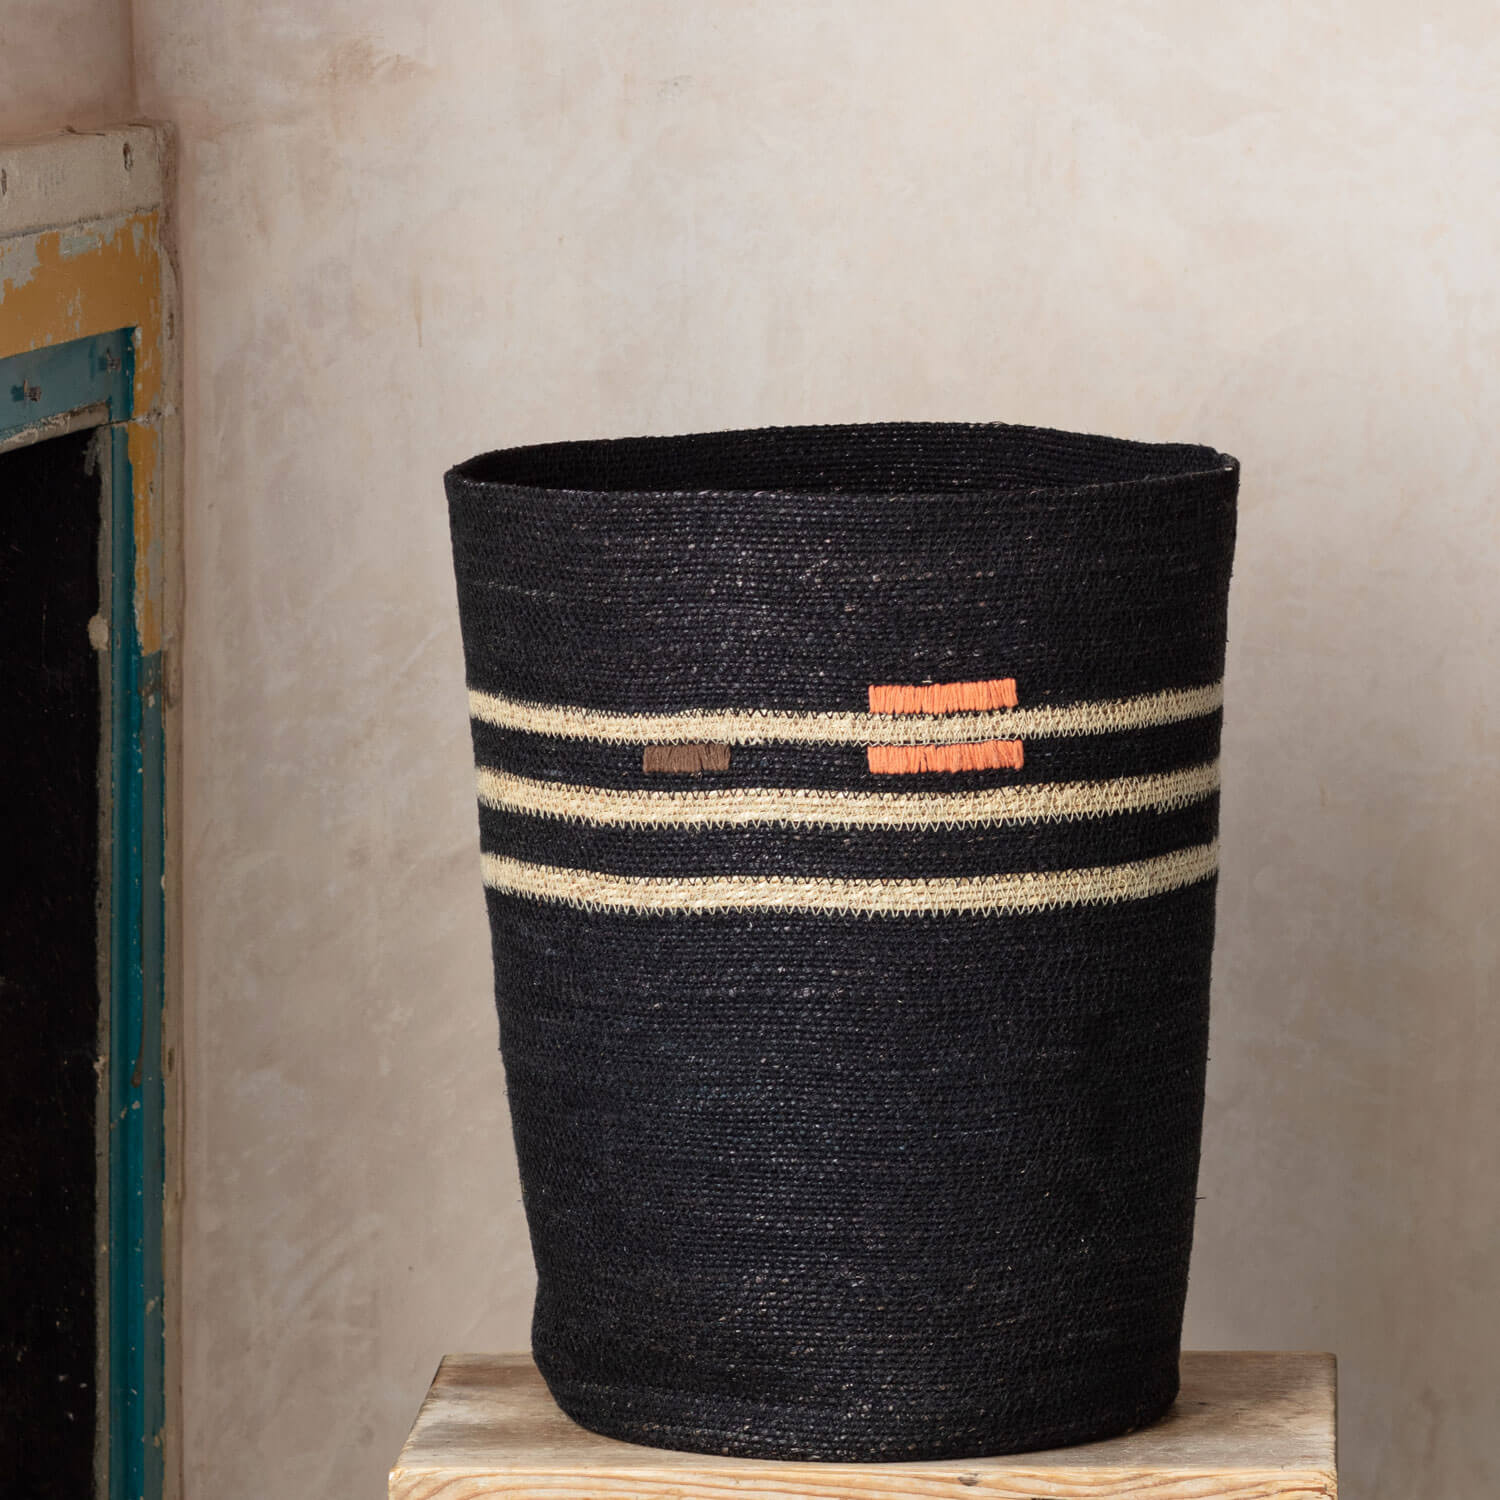 Read more about Graham and green striped black basket